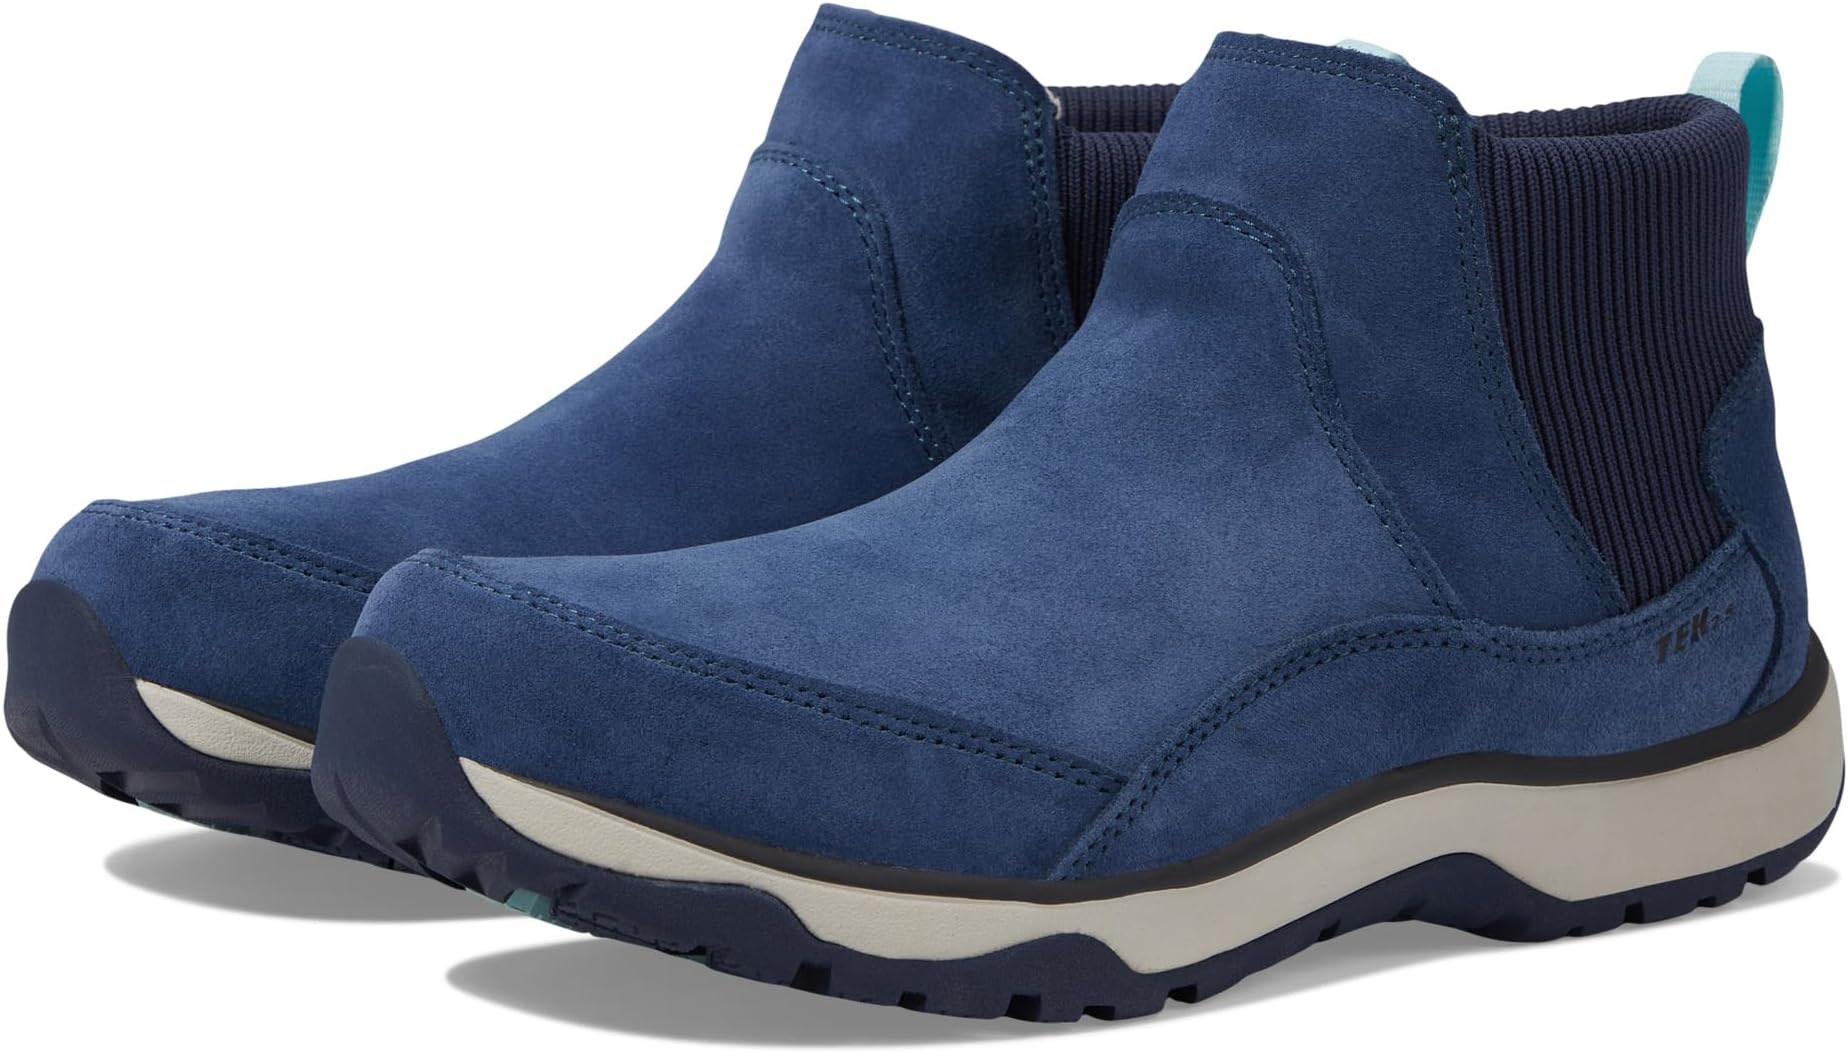 Зимние ботинки Snow Sneaker 5 Ankle Boot Water Resistant Insulated Pull-On L.L.Bean, цвет Bright Mariner/Classic Navy